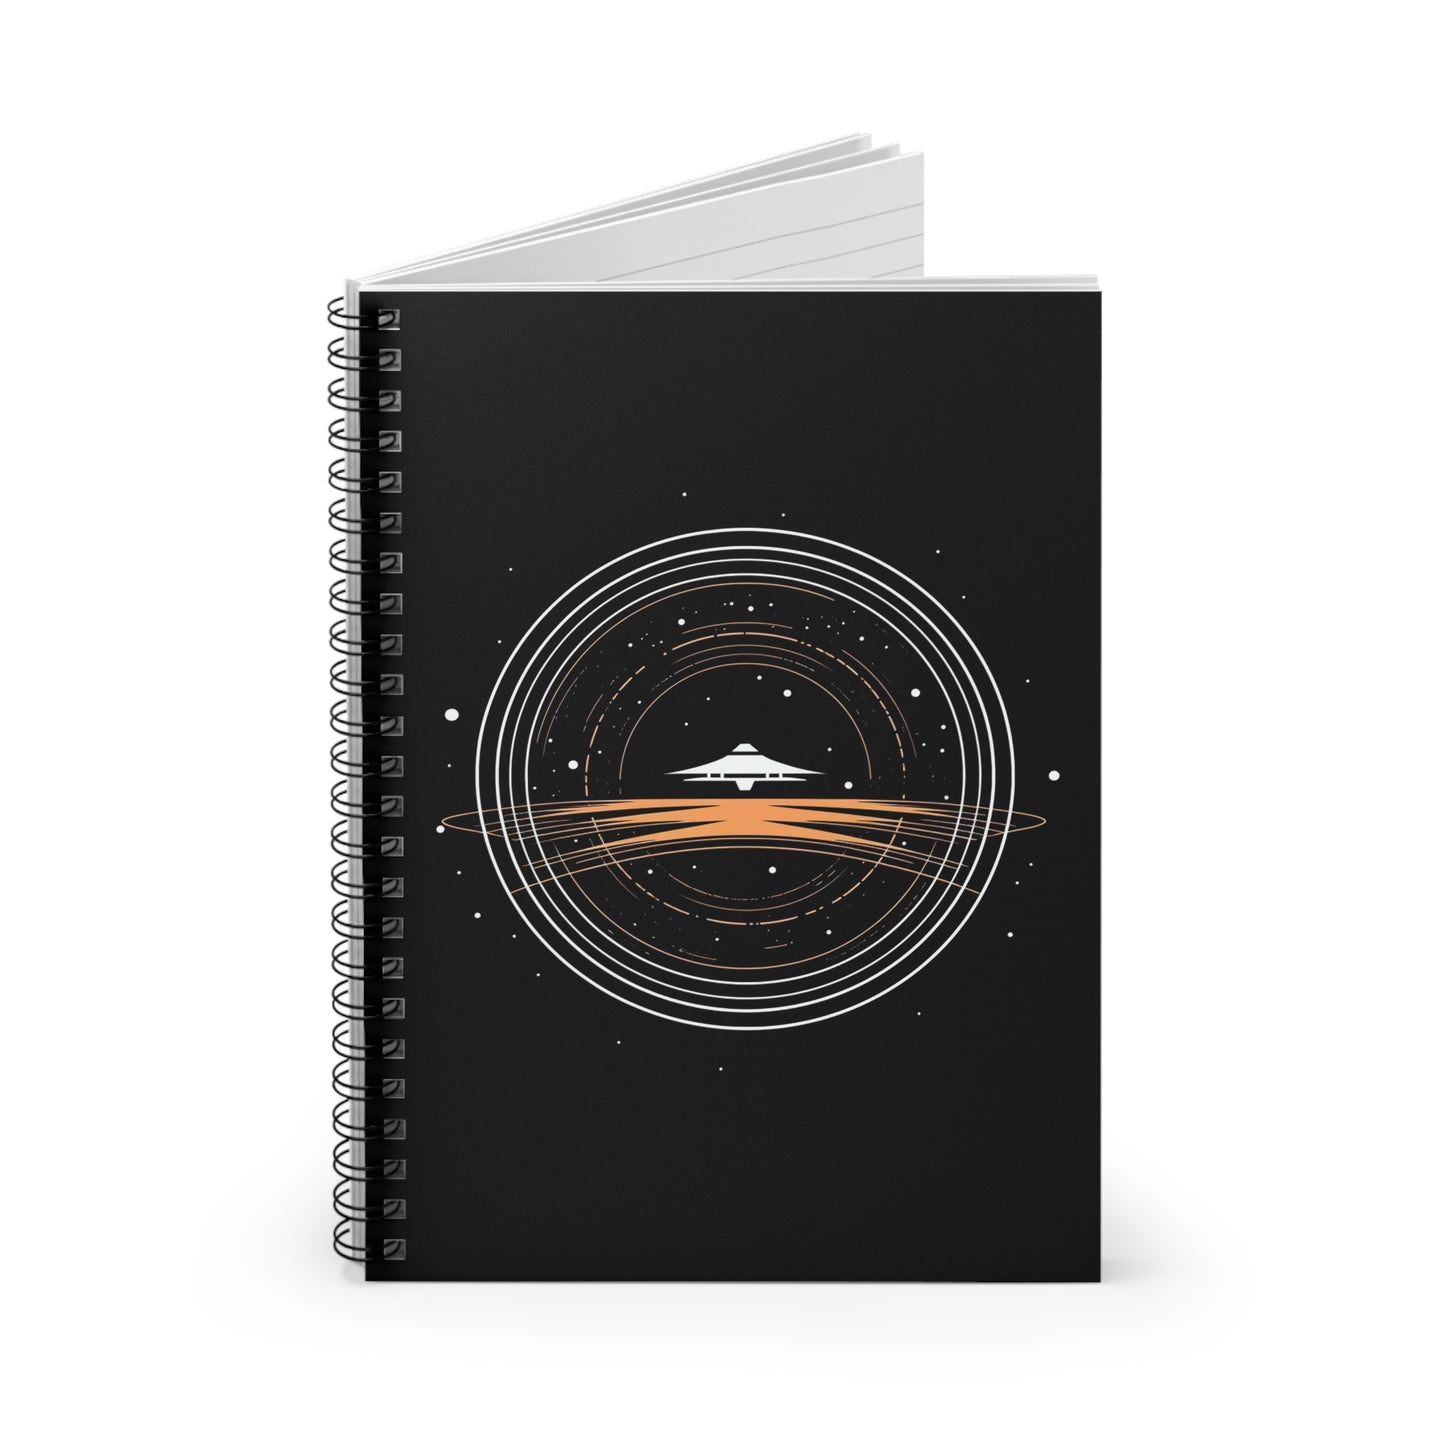 Minimalist Space Journal, Cosmic Explorer Diary, Black Space Logo Spiral Notebook, Sci-Fi UFO Spaceship Diary, Astronomy Notes, Ruled Line